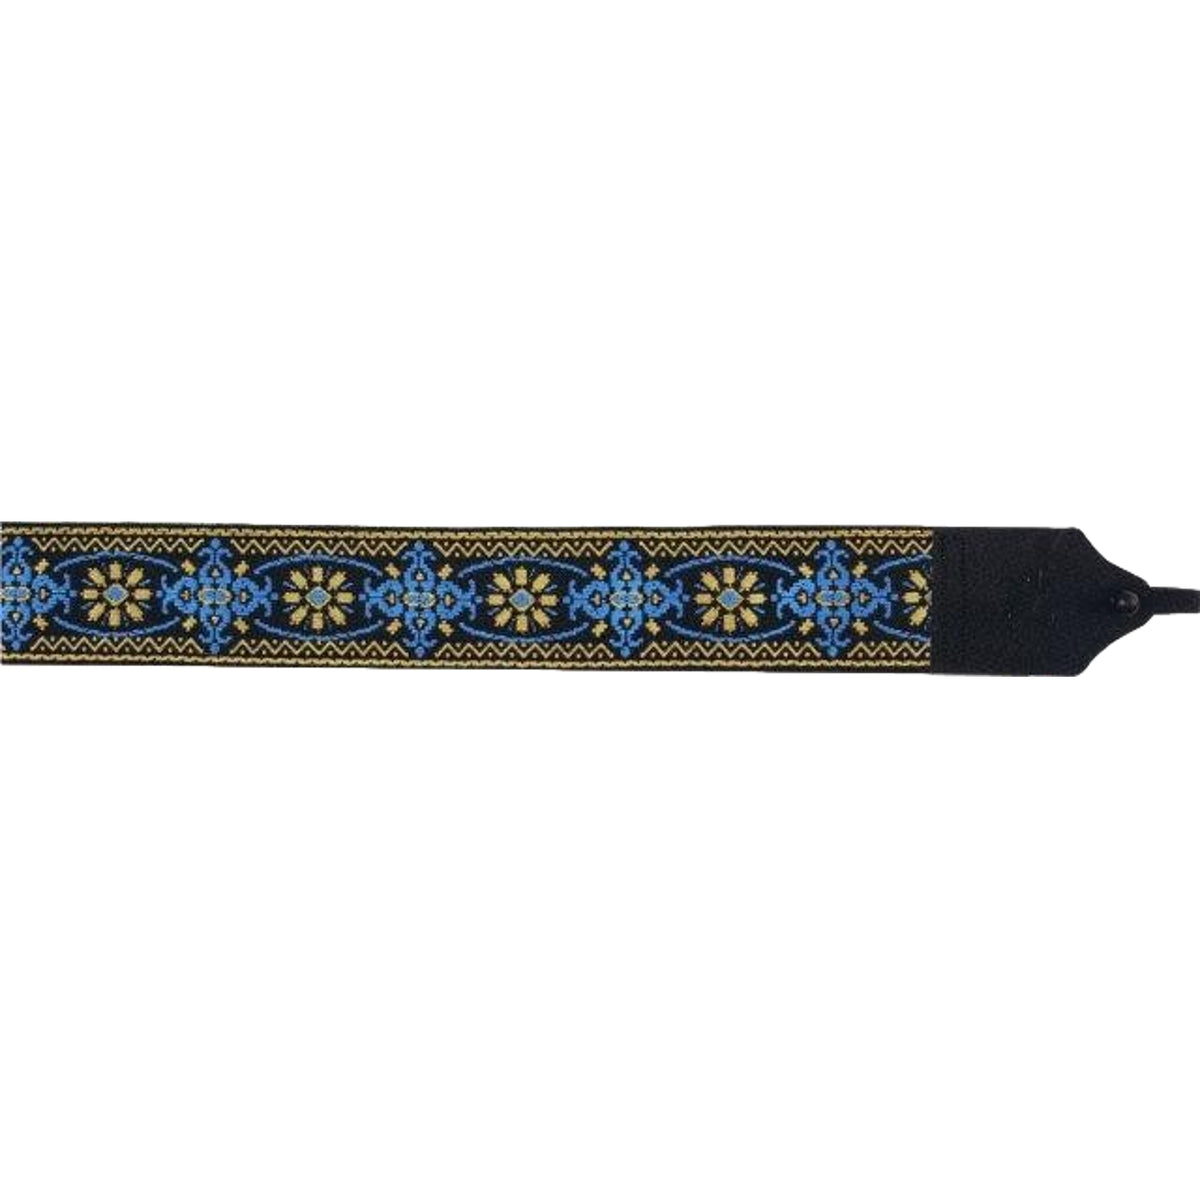 LM Banjo Strap 2 Inch Blue and Gold